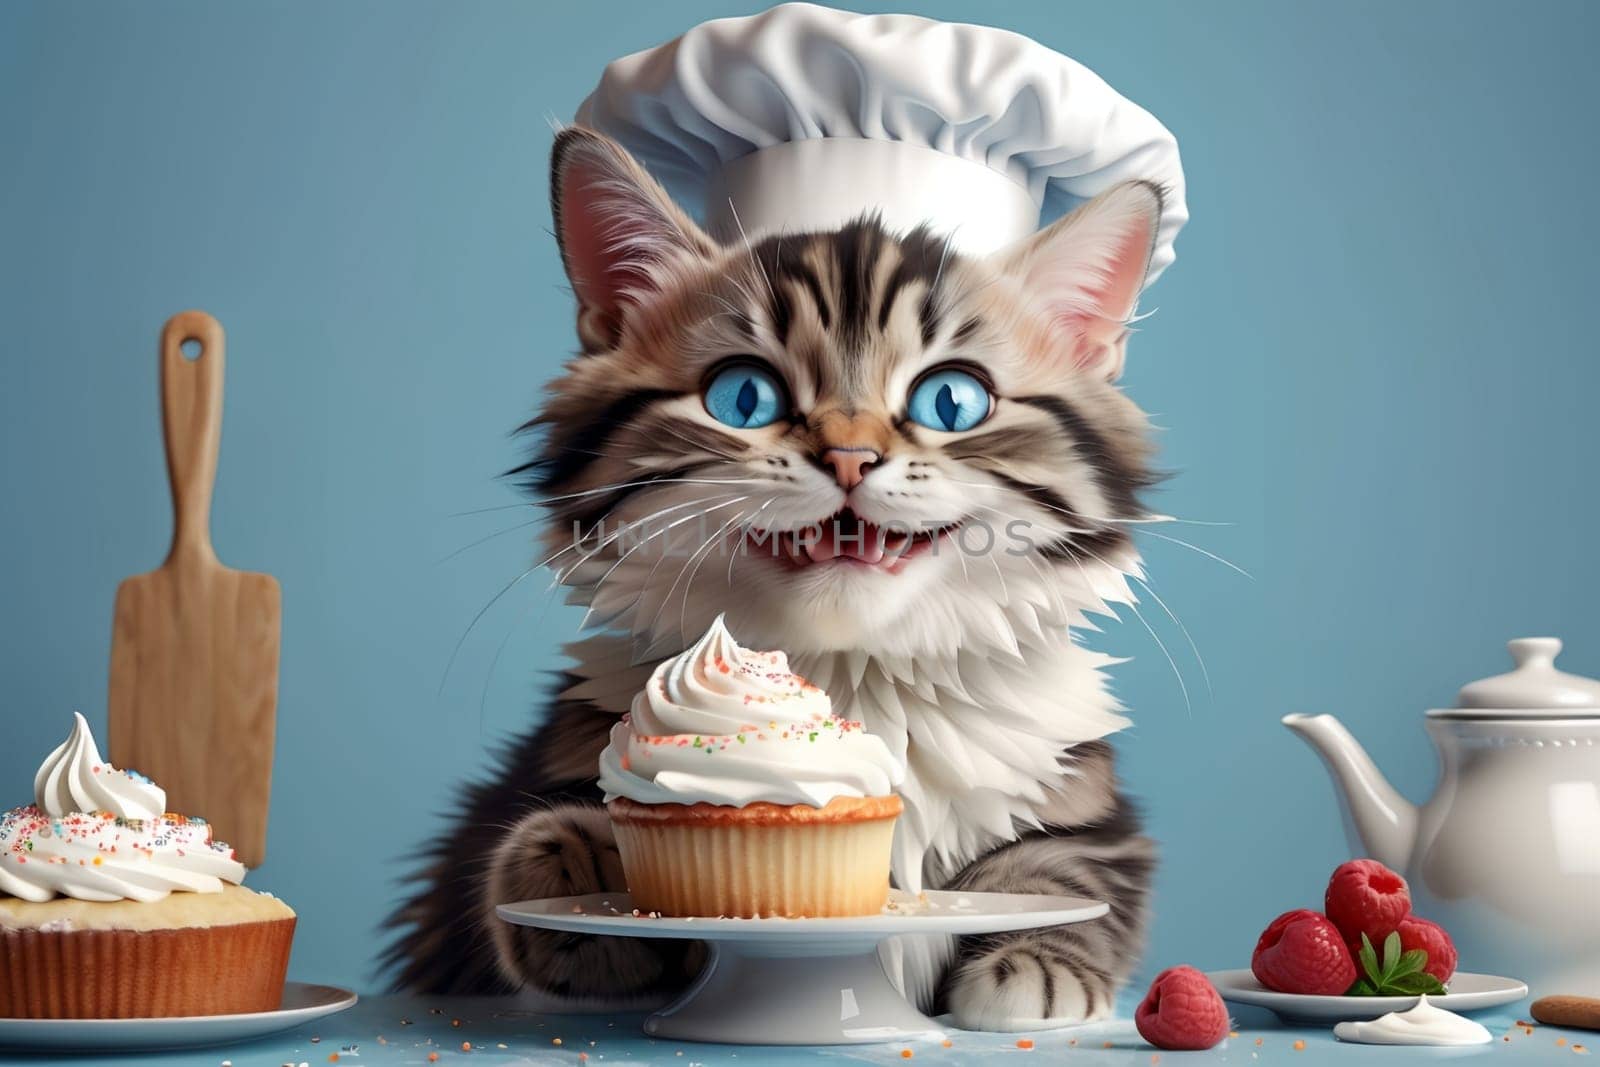 professional cat pastry chef prepares sweet pastries and cakes .